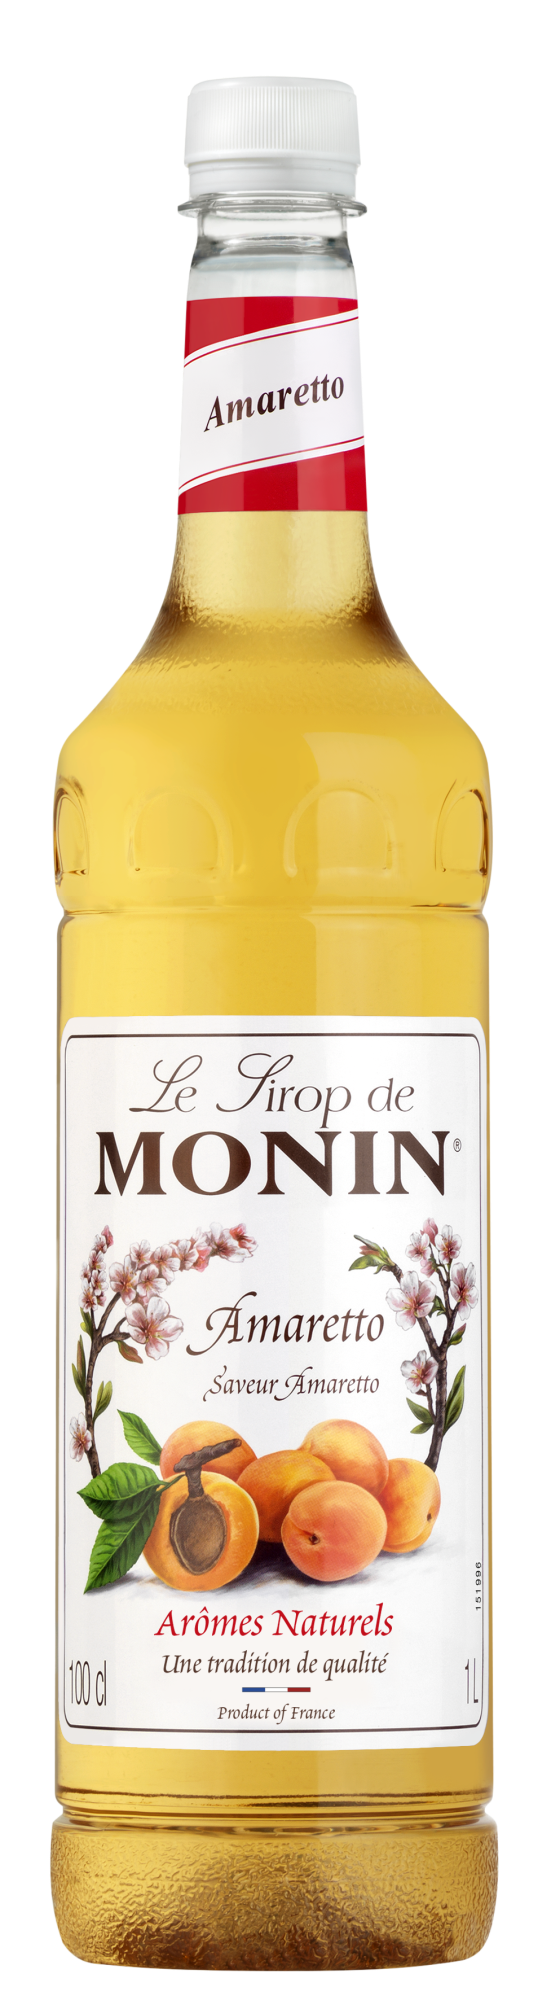 Buy MONIN Amaretto syrup. It is perfect in coffees, hot chocolate, iced coffees, frappes, cocktails and mocktails.